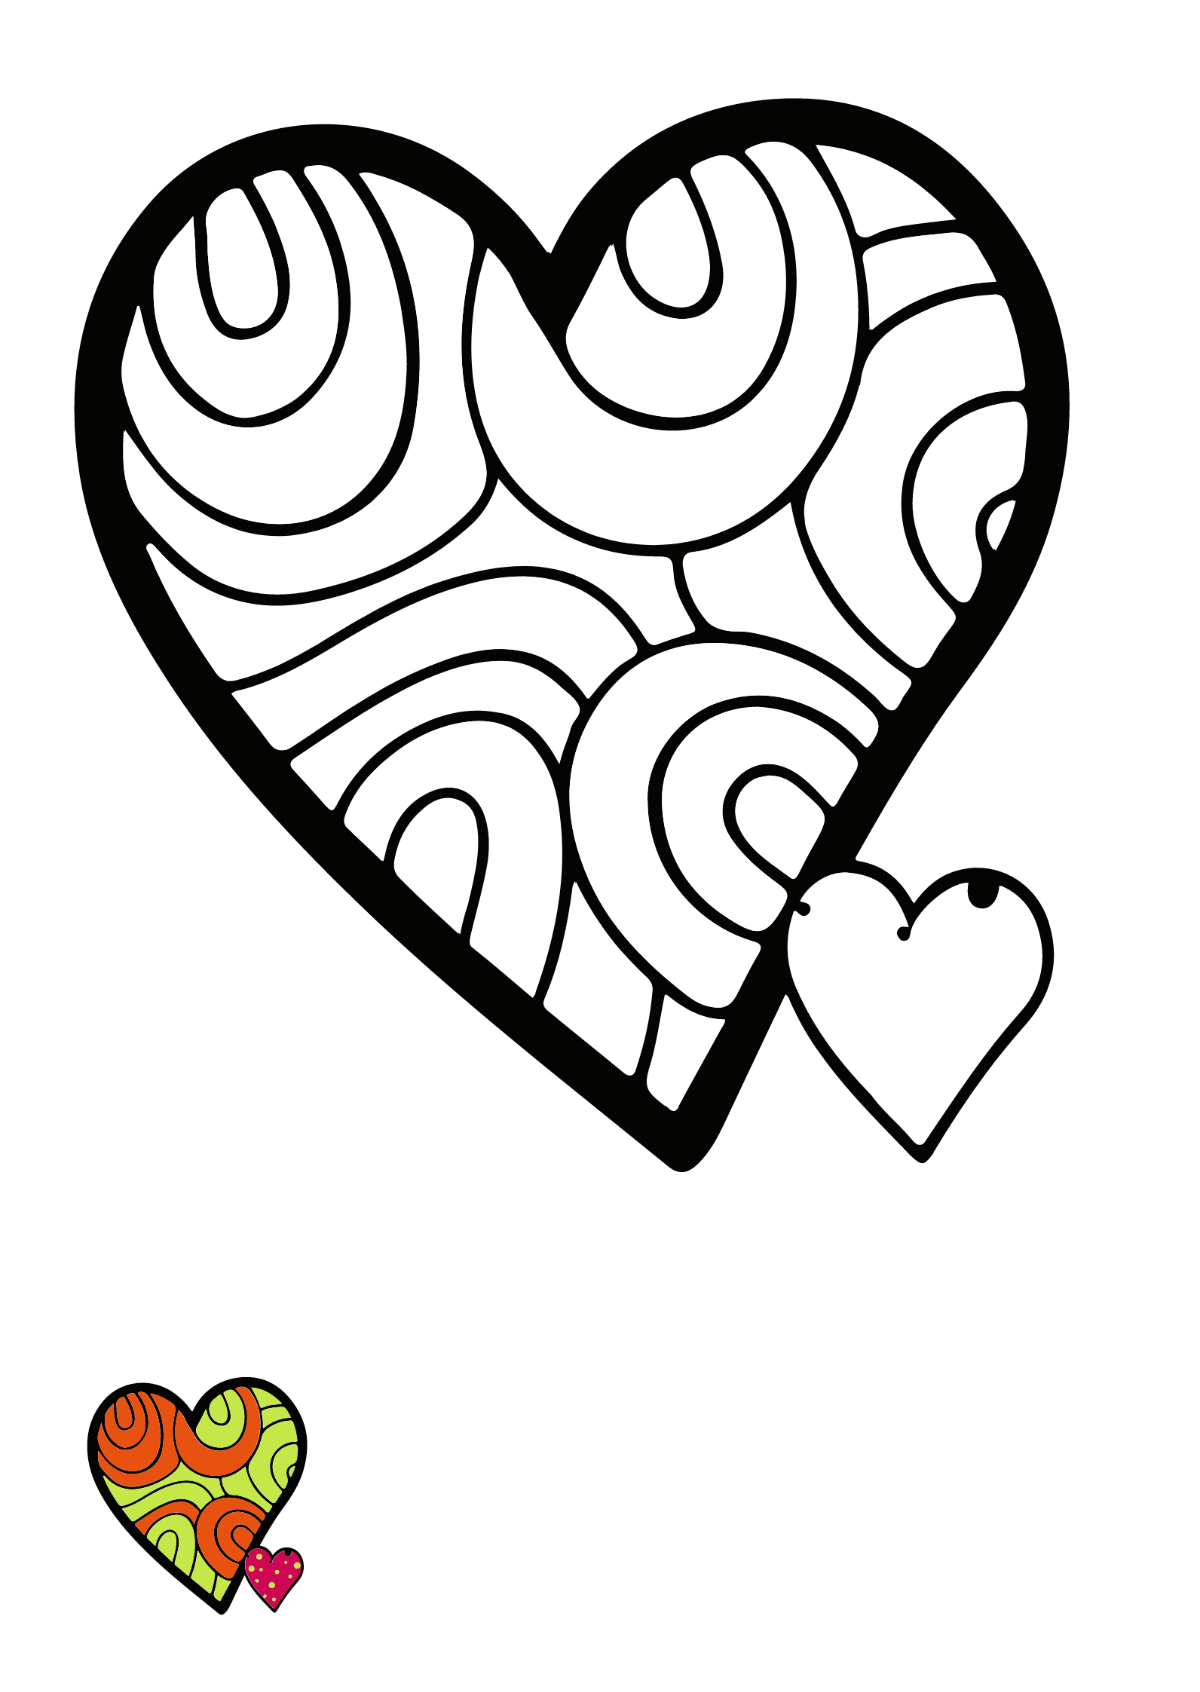 Drawn Heart Coloring Page Shape Template